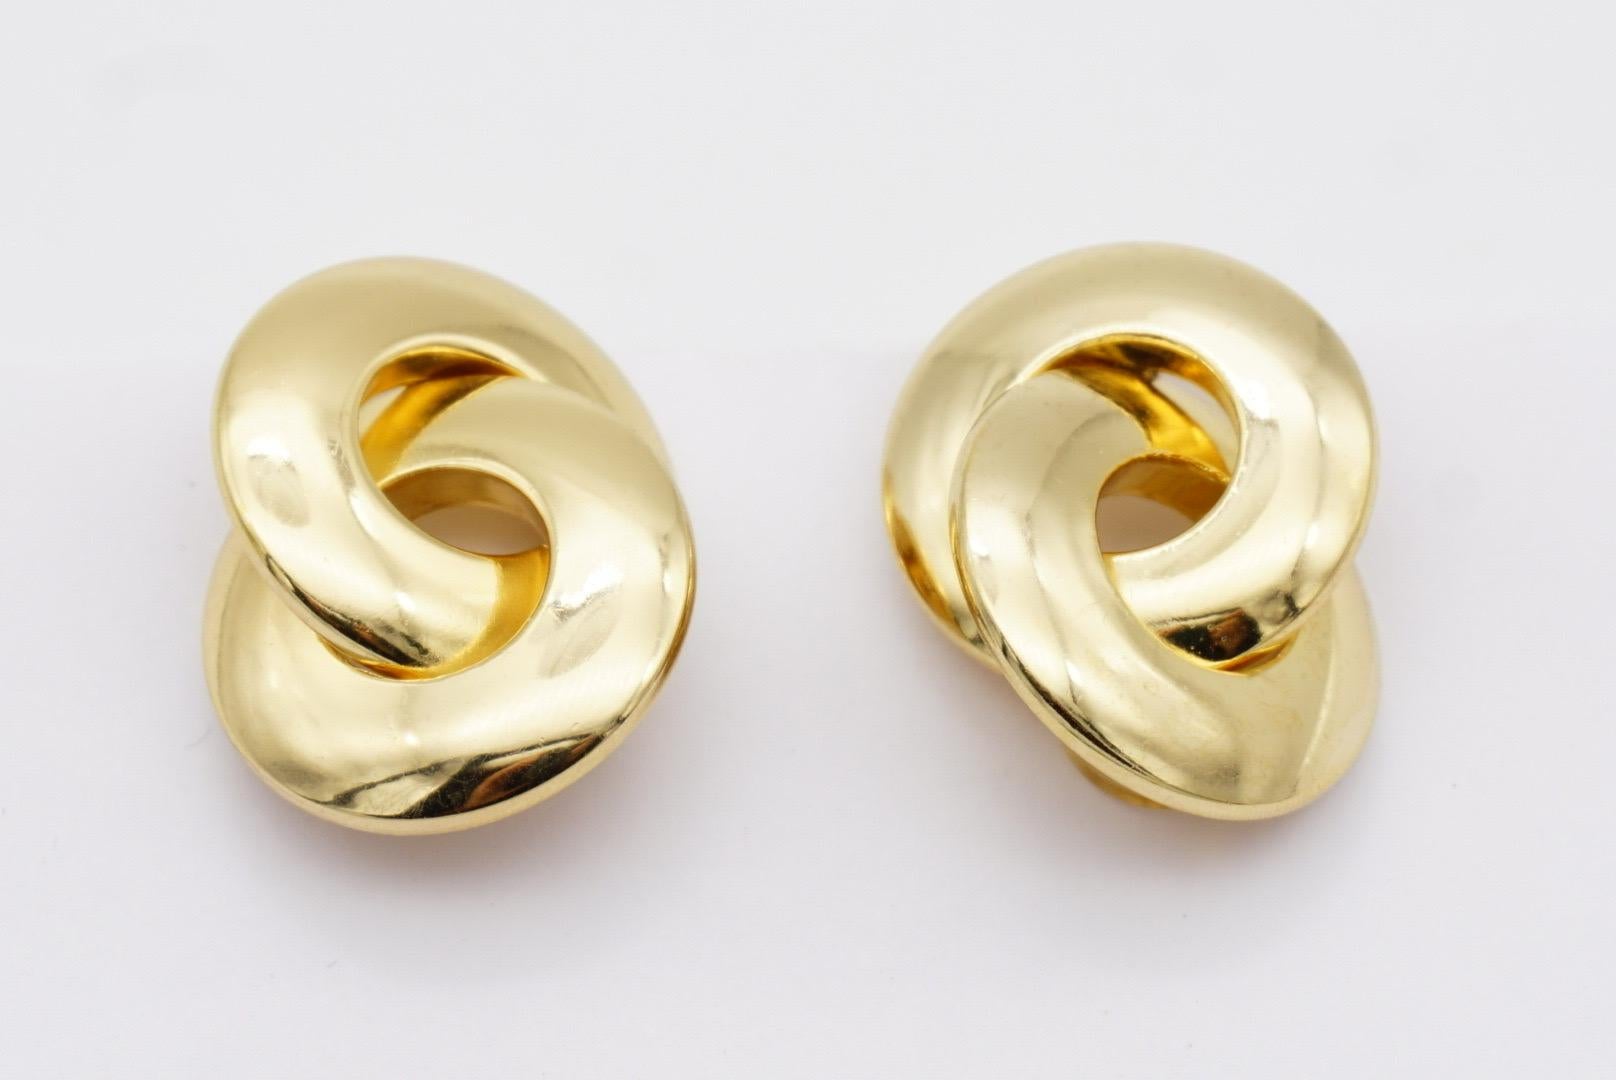 Christian Dior Vintage 1980s Large Glow Twist Intertwined Knot Clip Earrings For Sale 7